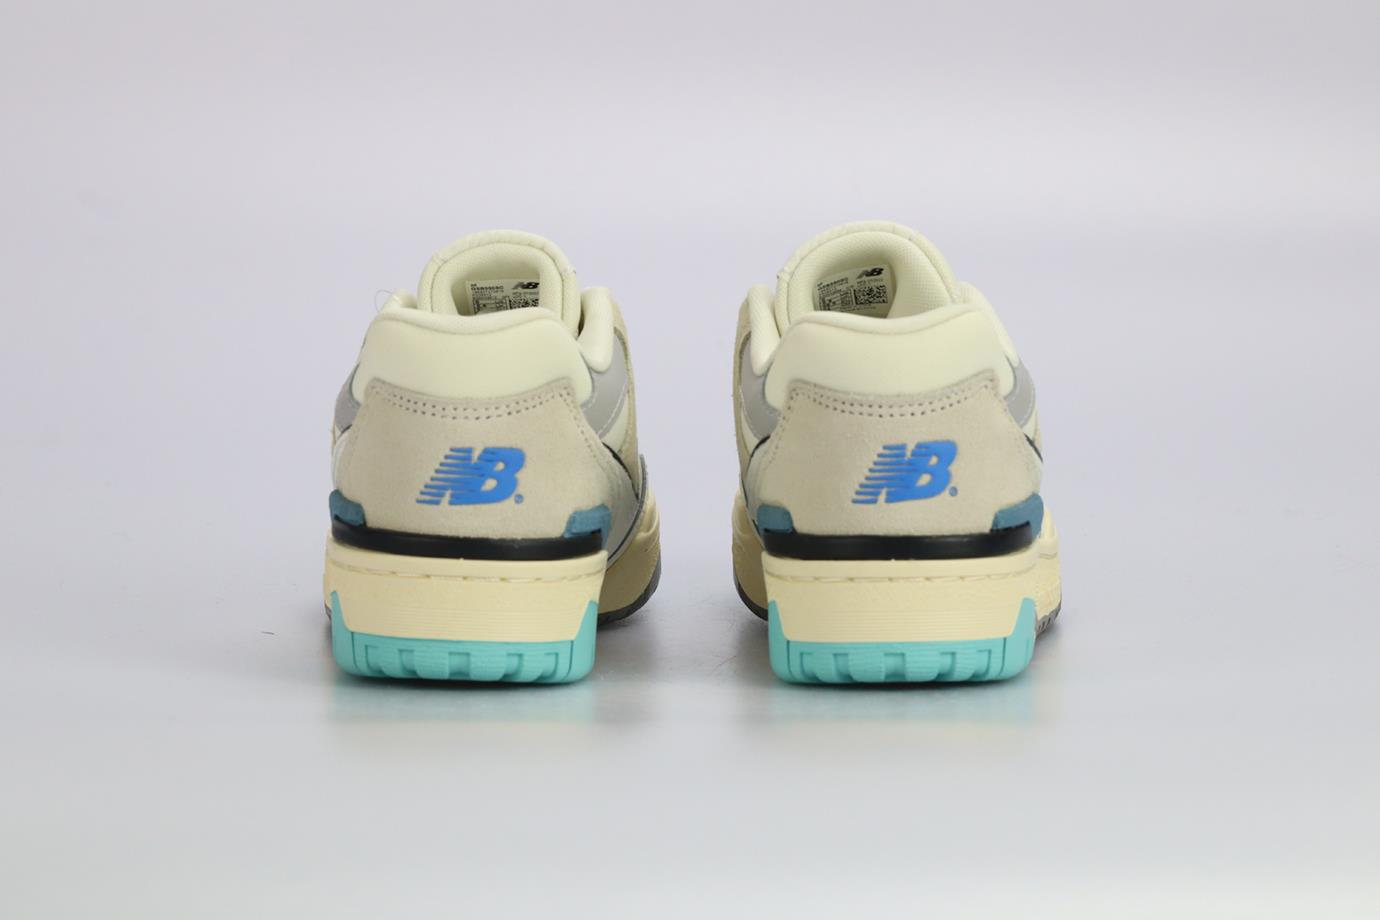 NEW BALANCE 550 SURF SUEDE AND LEATHER SNEAKERS EU 38.5 UK 5.5 US 6